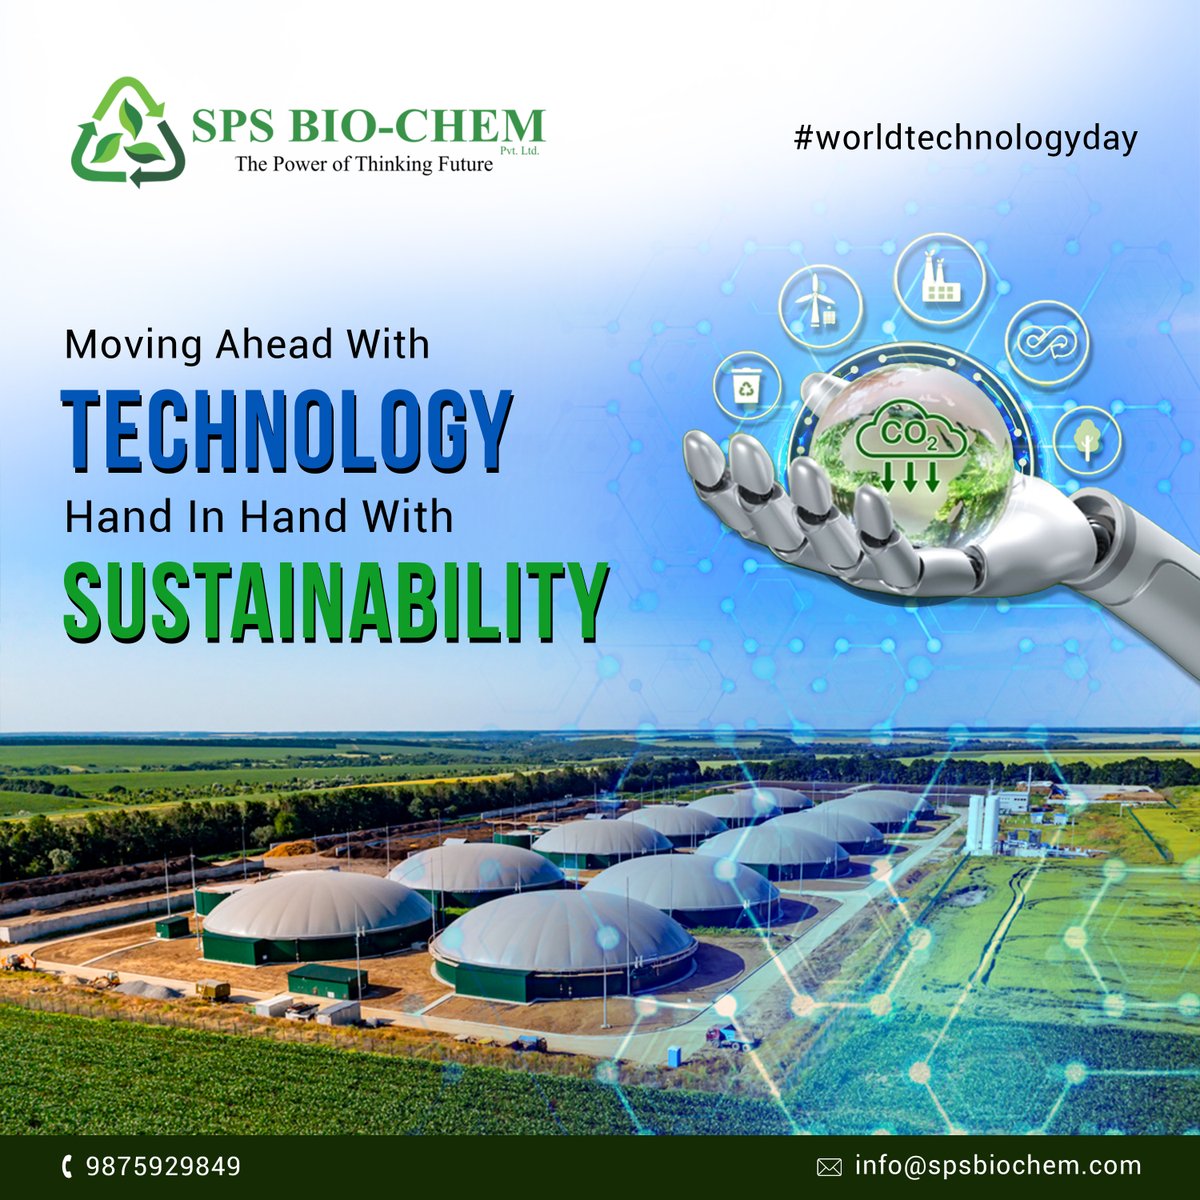 SPS Biochem is leading the way in sustainable technology, providing innovative solutions for a greener future. #nationaltechnologyday #technologyday 🌱🌍 #SustainableTech #organicfertilizers #InnovativeSolutions #SPSBiochem